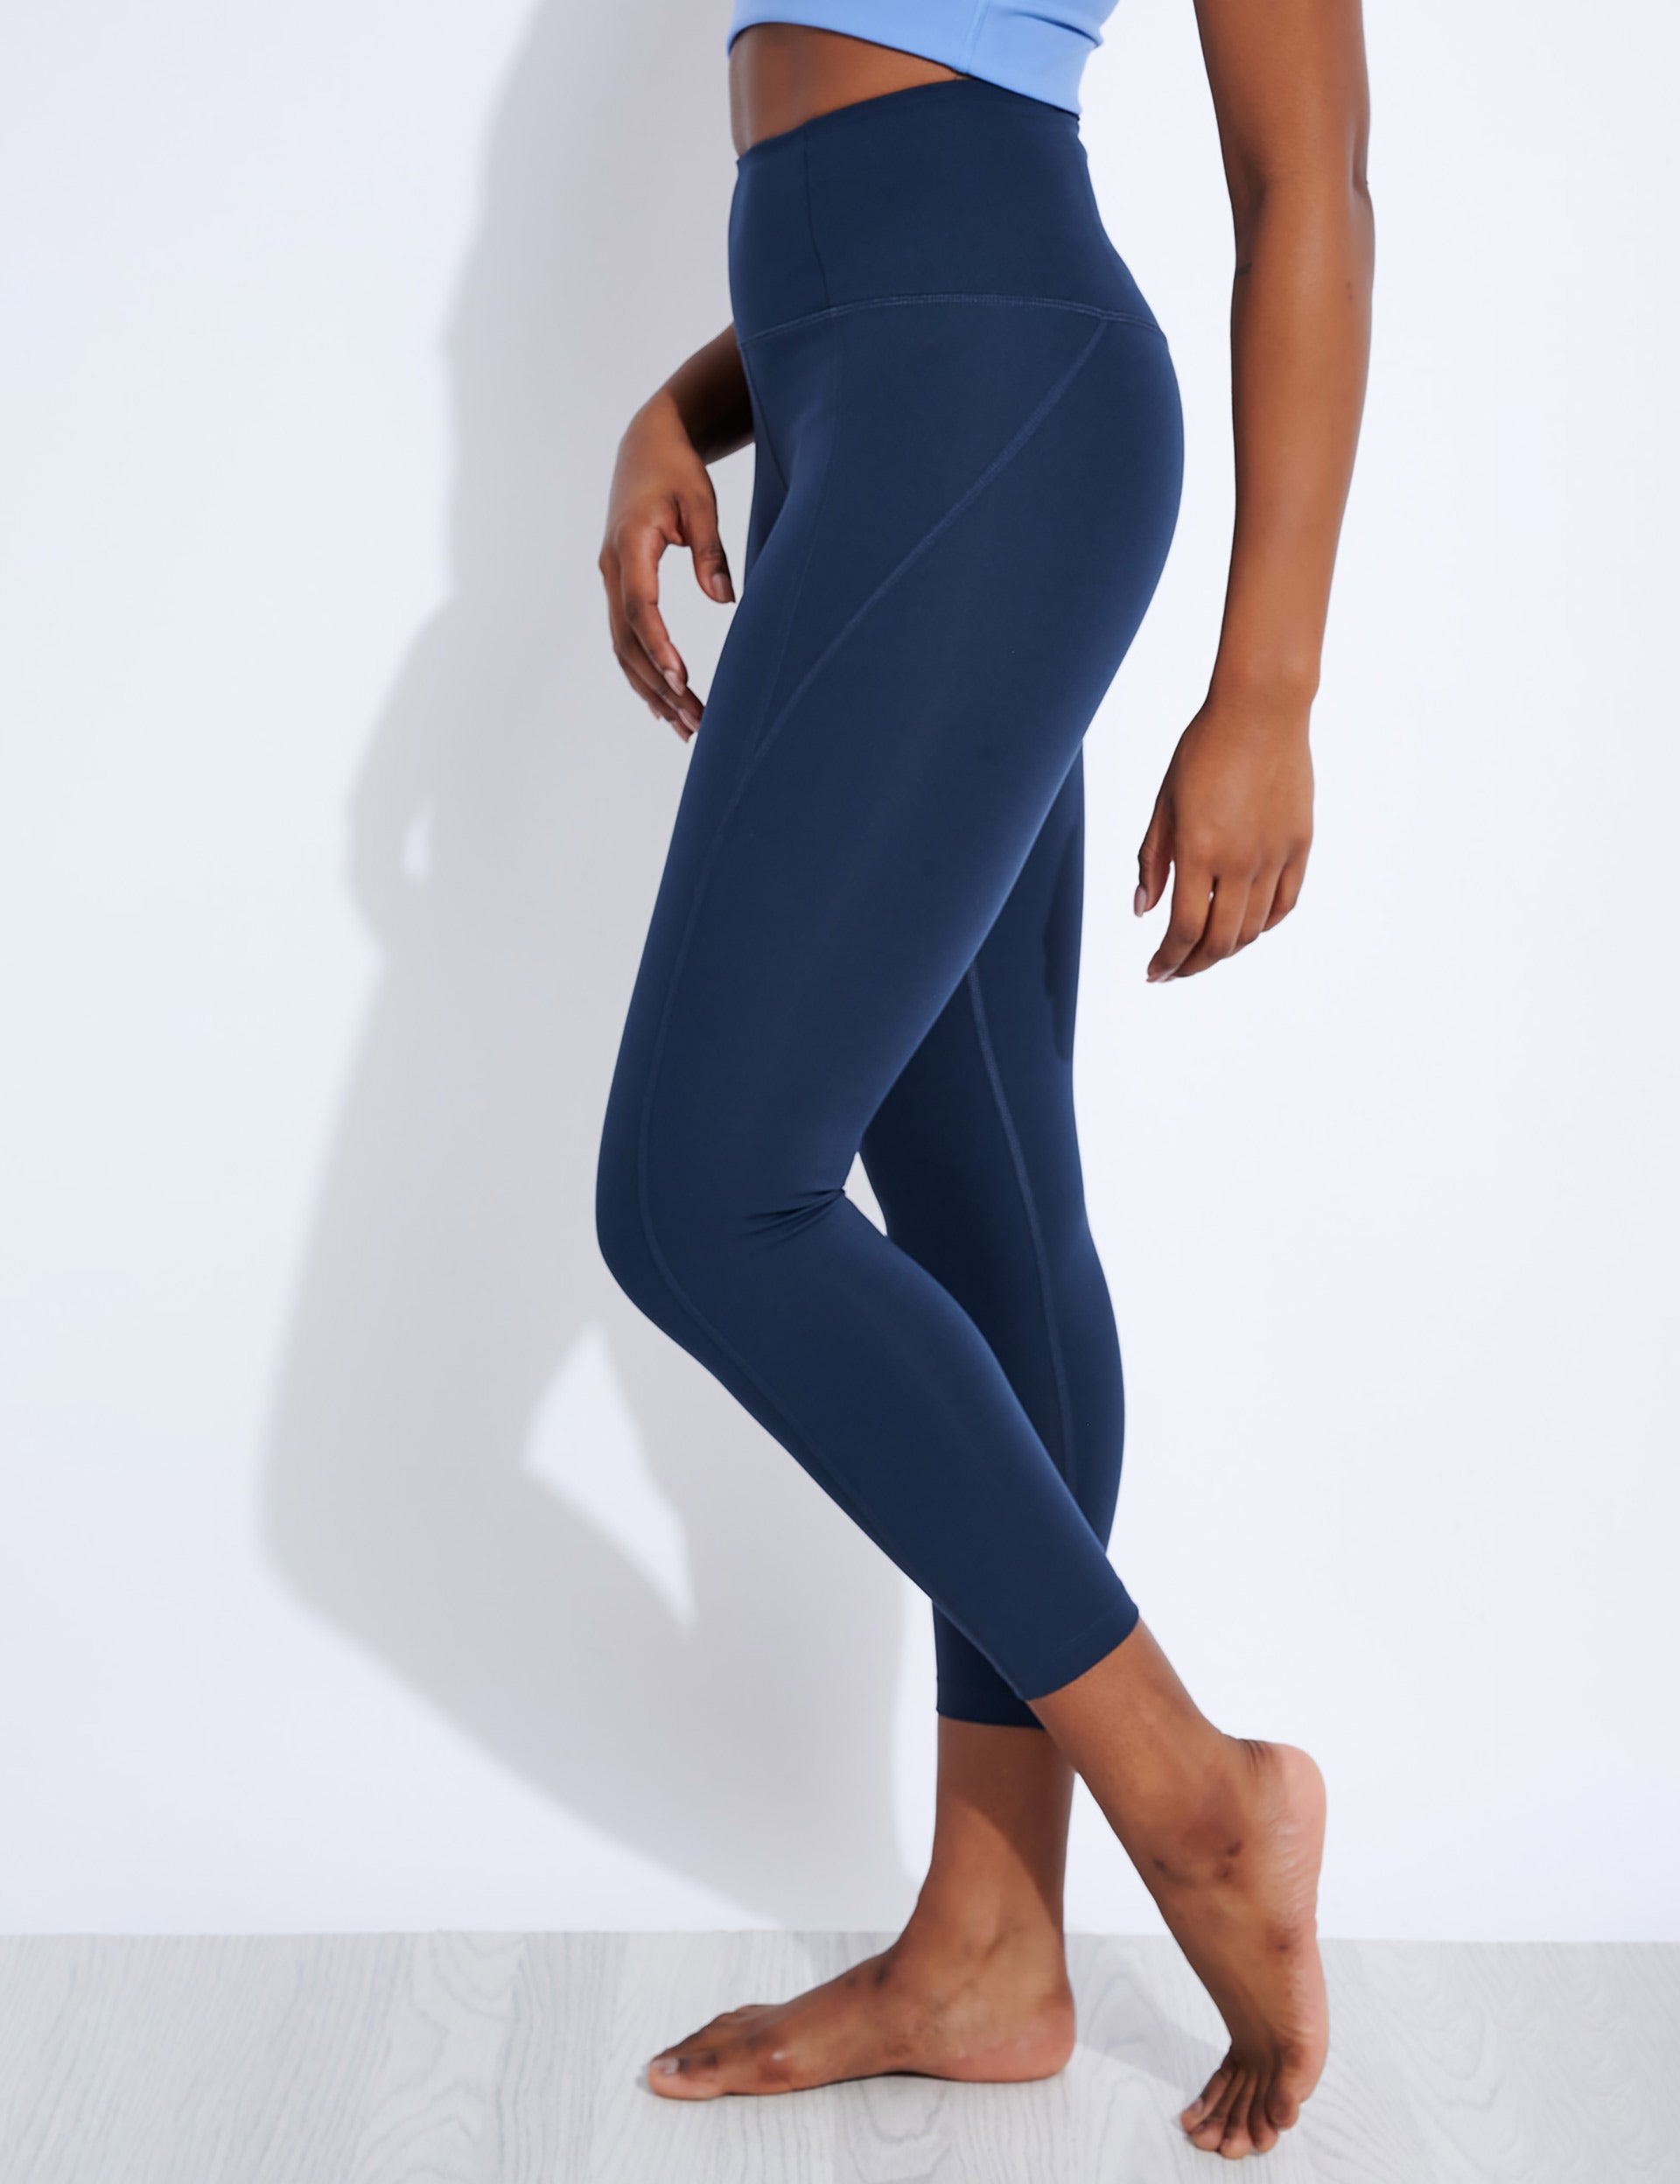 Girlfriend Collective Compressive High Waisted 7/8 Legging - Midnightimage1- The Sports Edit